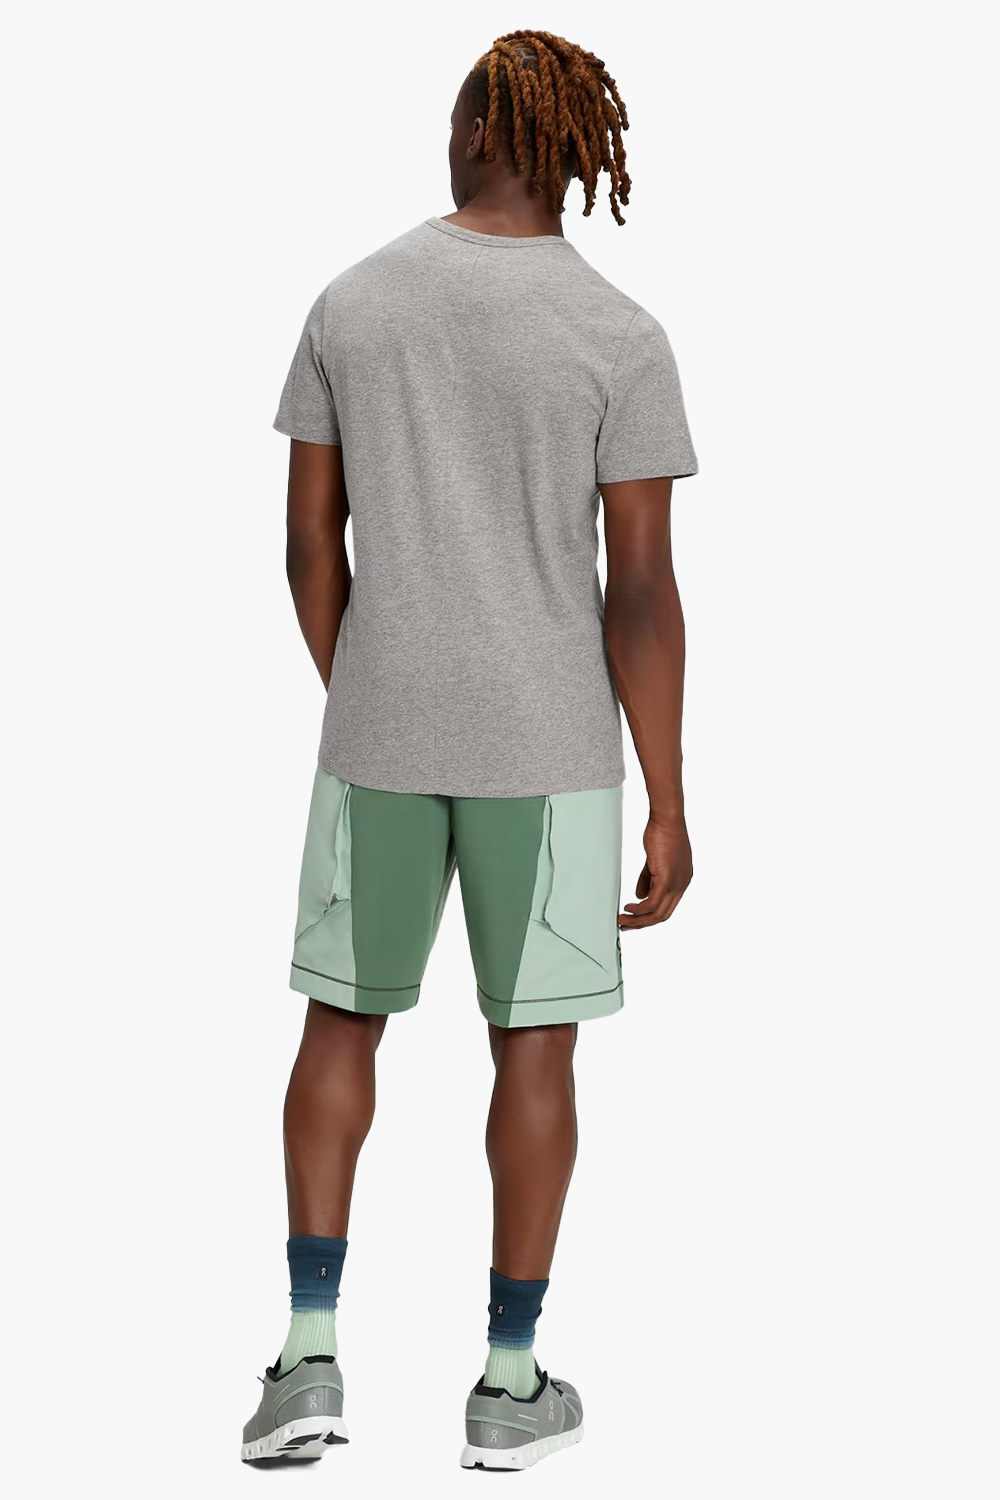 ON | Men's Movement Short in Ivy/Moss